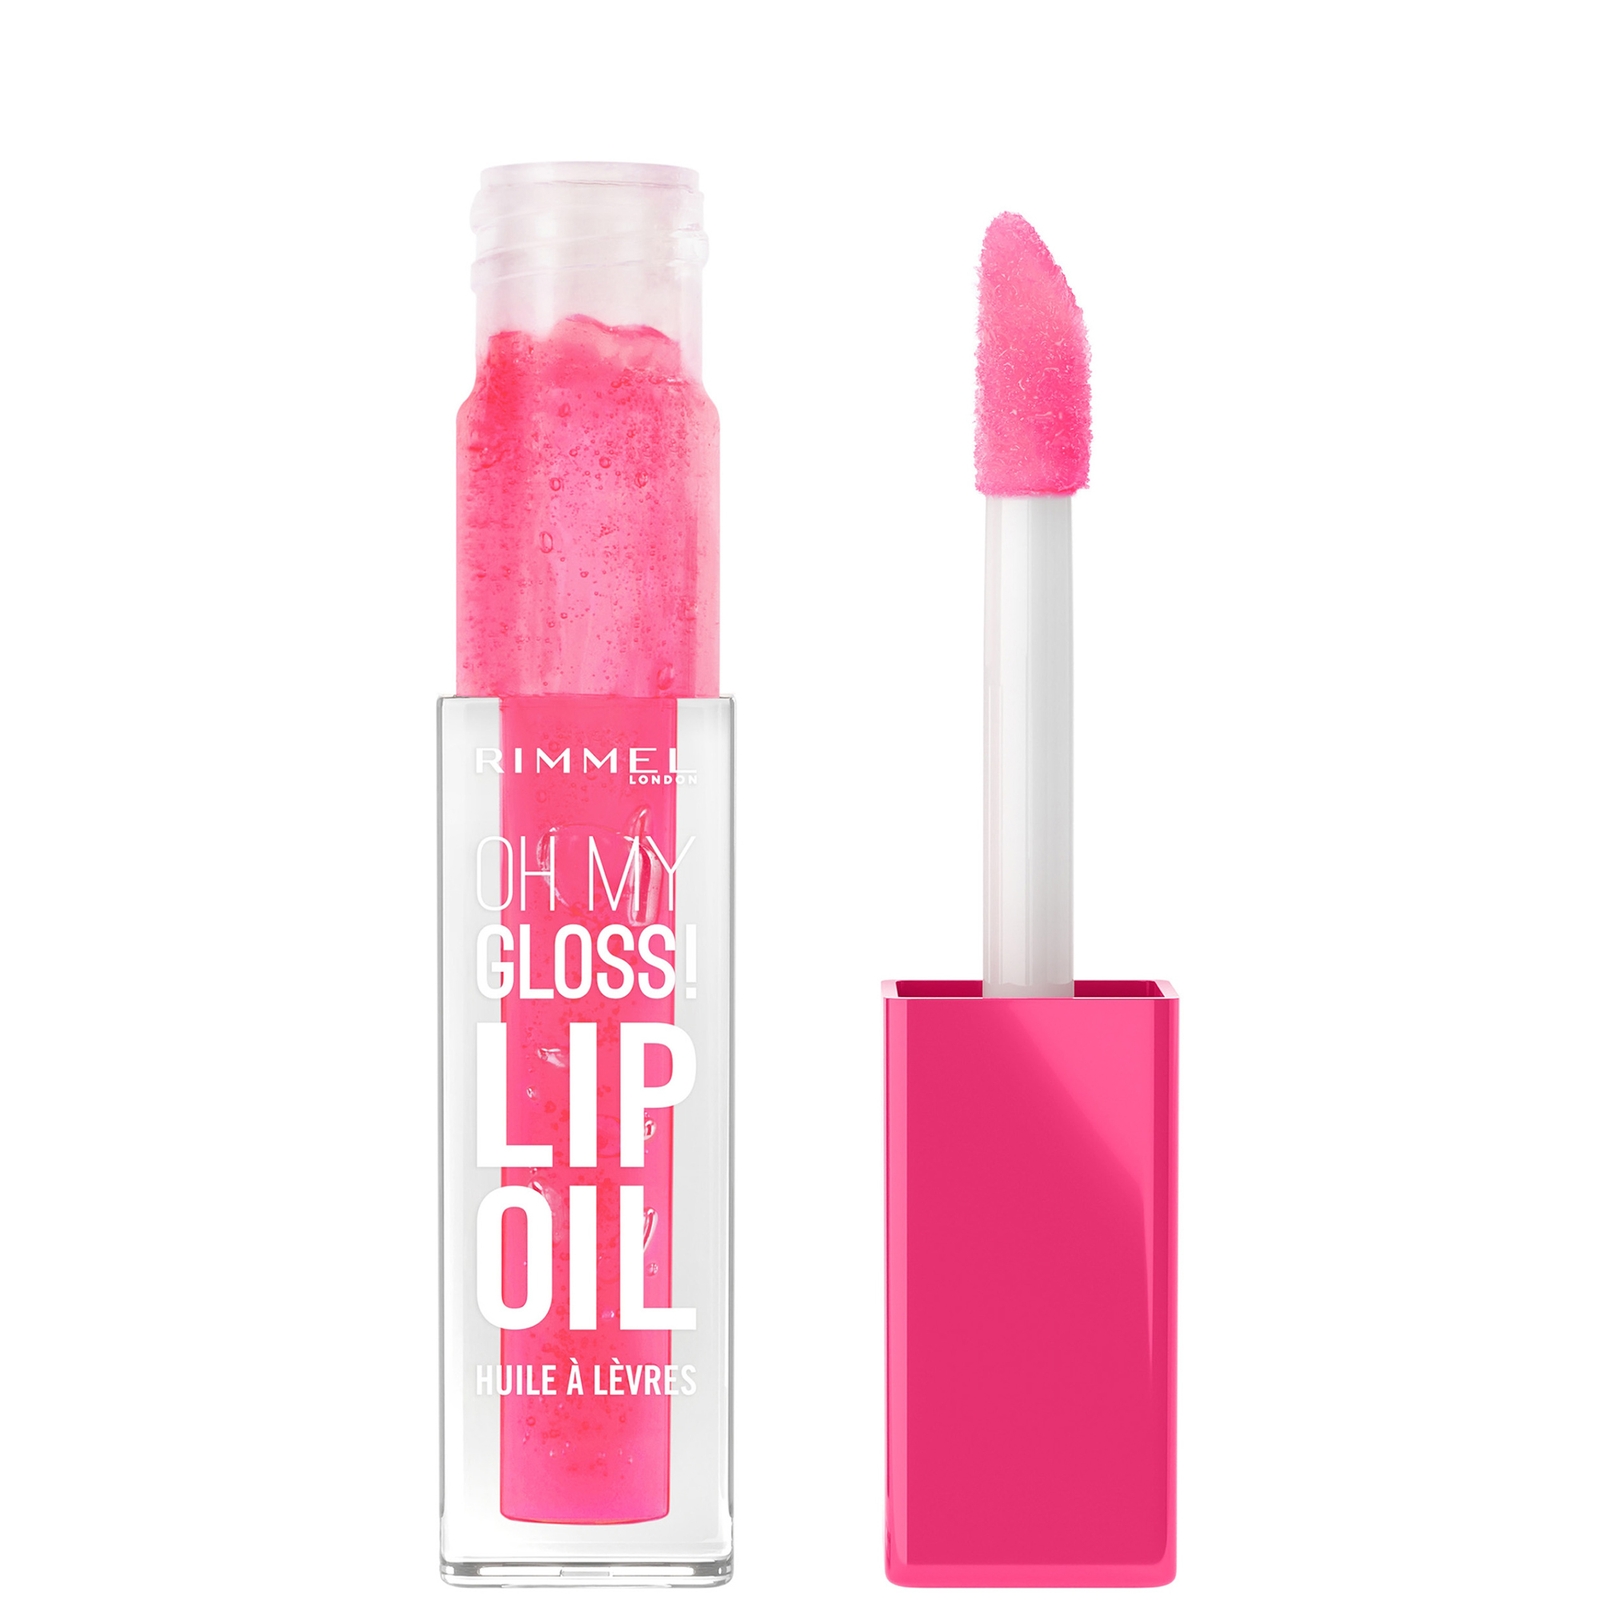 Shop Rimmel Oh My Gloss! Lip Oil 6ml (various Shades) - Berry Pink